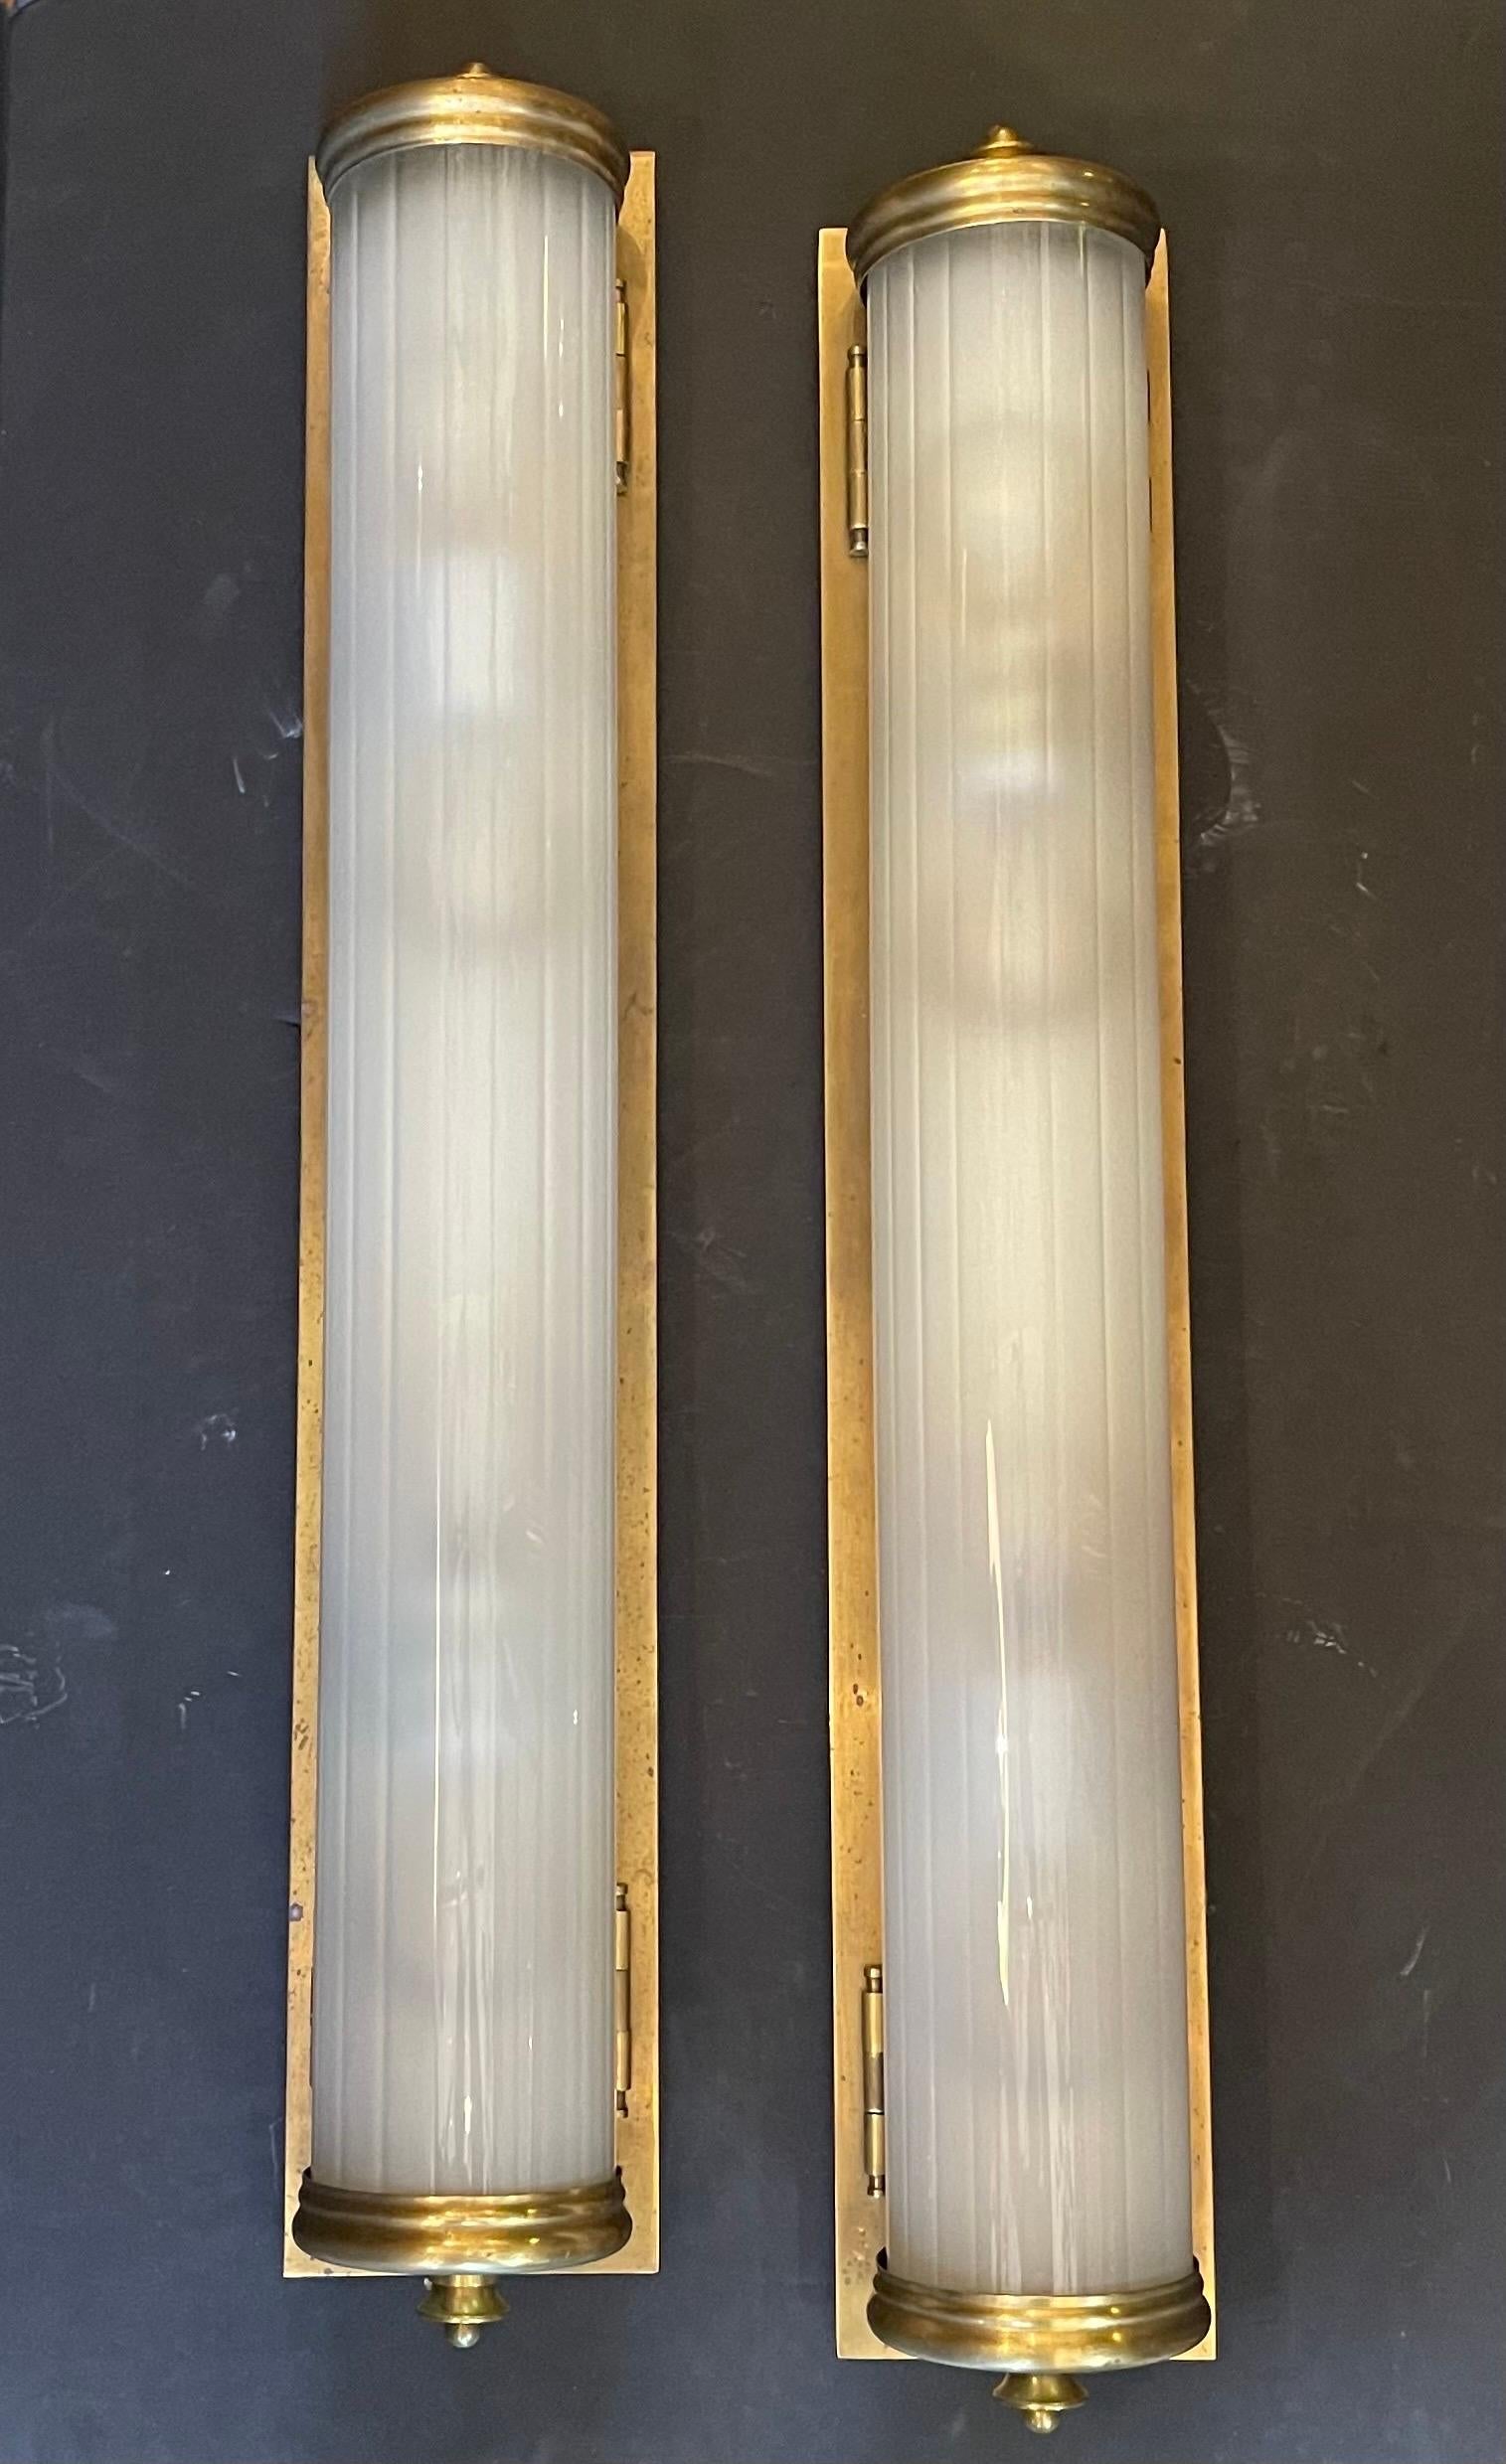 A Wonderful Large Pair Of Vintage Bronze & Curved Frosted Glass Lantern Sconces Each Fitted With Four Edison Light In The Manner Of Vaughan 
Wiring Up To Date With UL